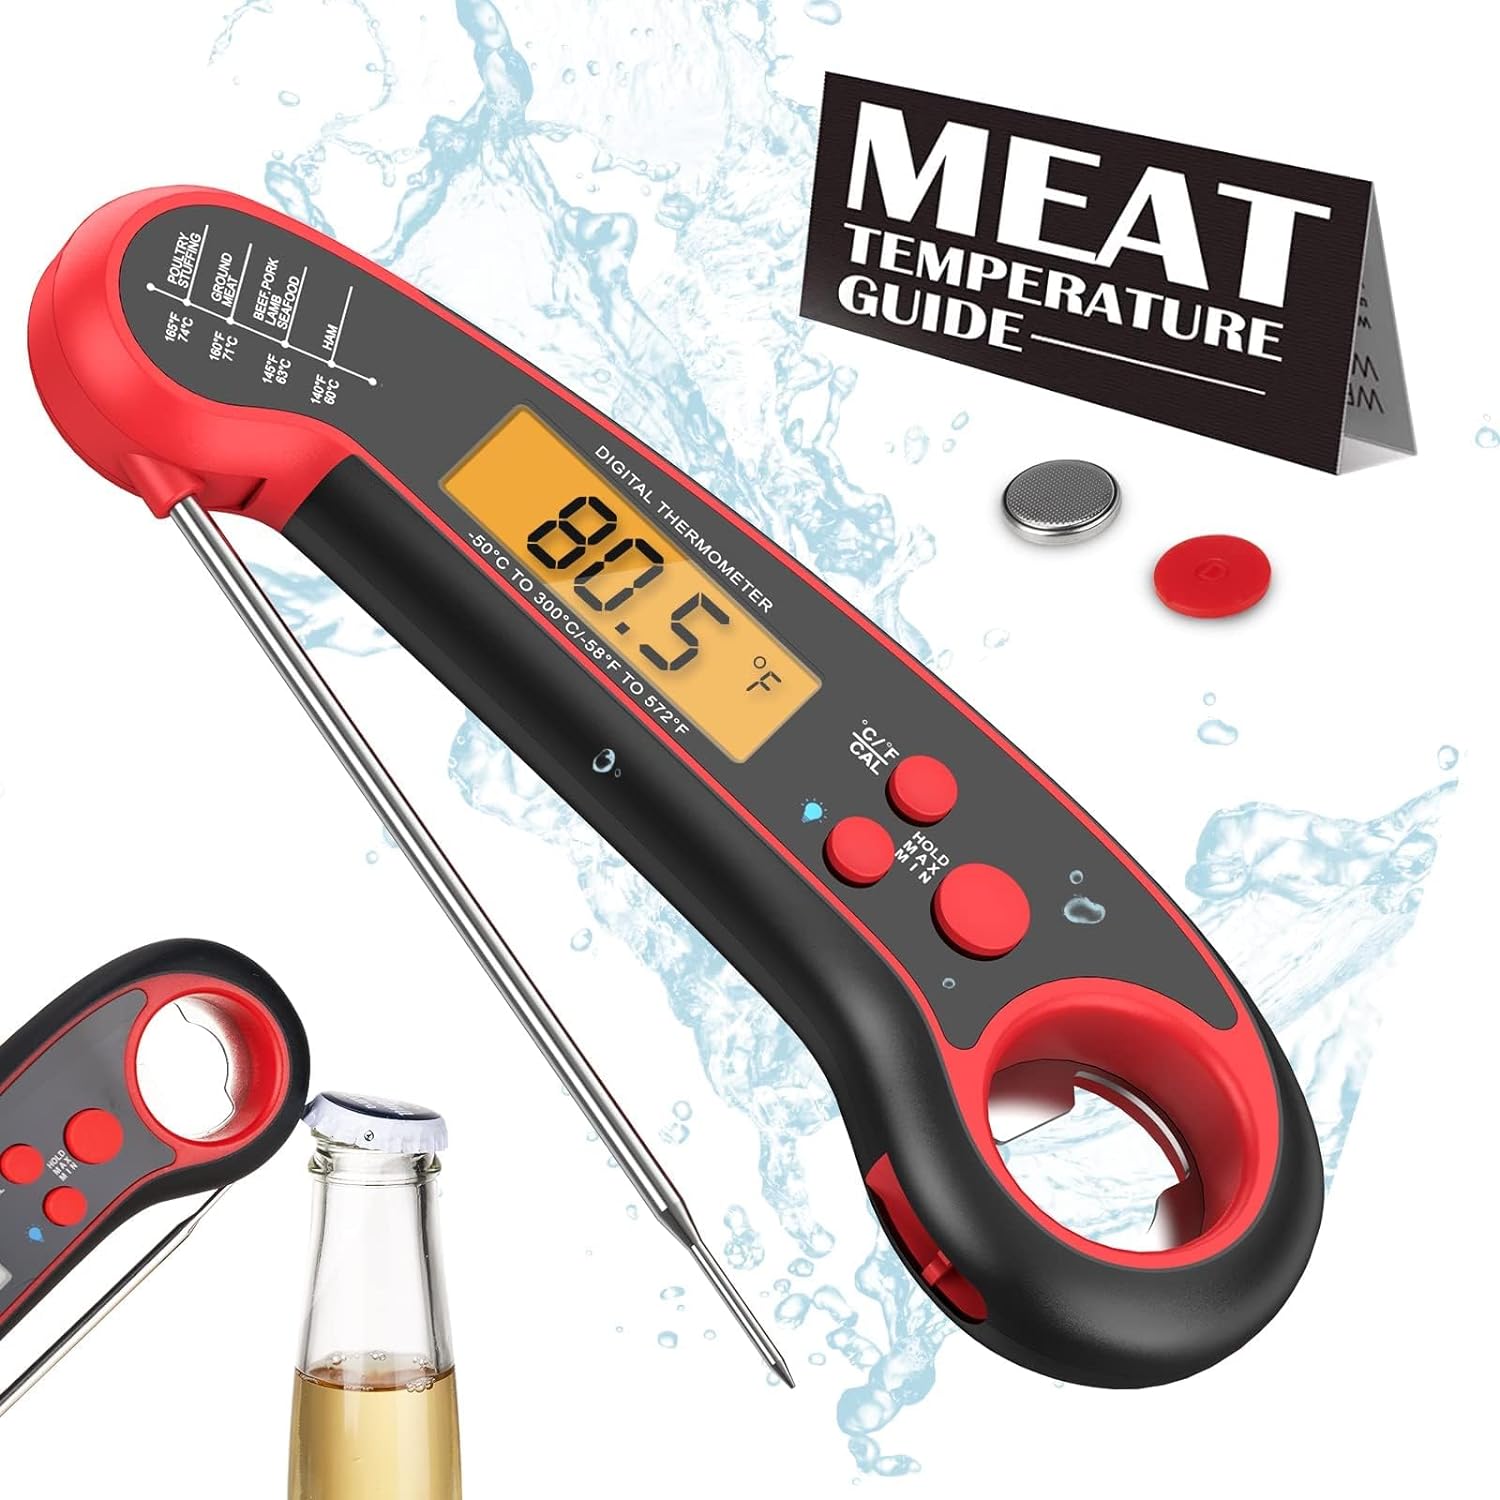 Meat Thermometer, Meat thermometers for Grilling Ultra-Fast Waterproof Meat Thermometer Digital with Backlight, Magnet, and Foldable Probe - Perfect for Grilling, Cooking, BBQ, Candy, and Deep Fry